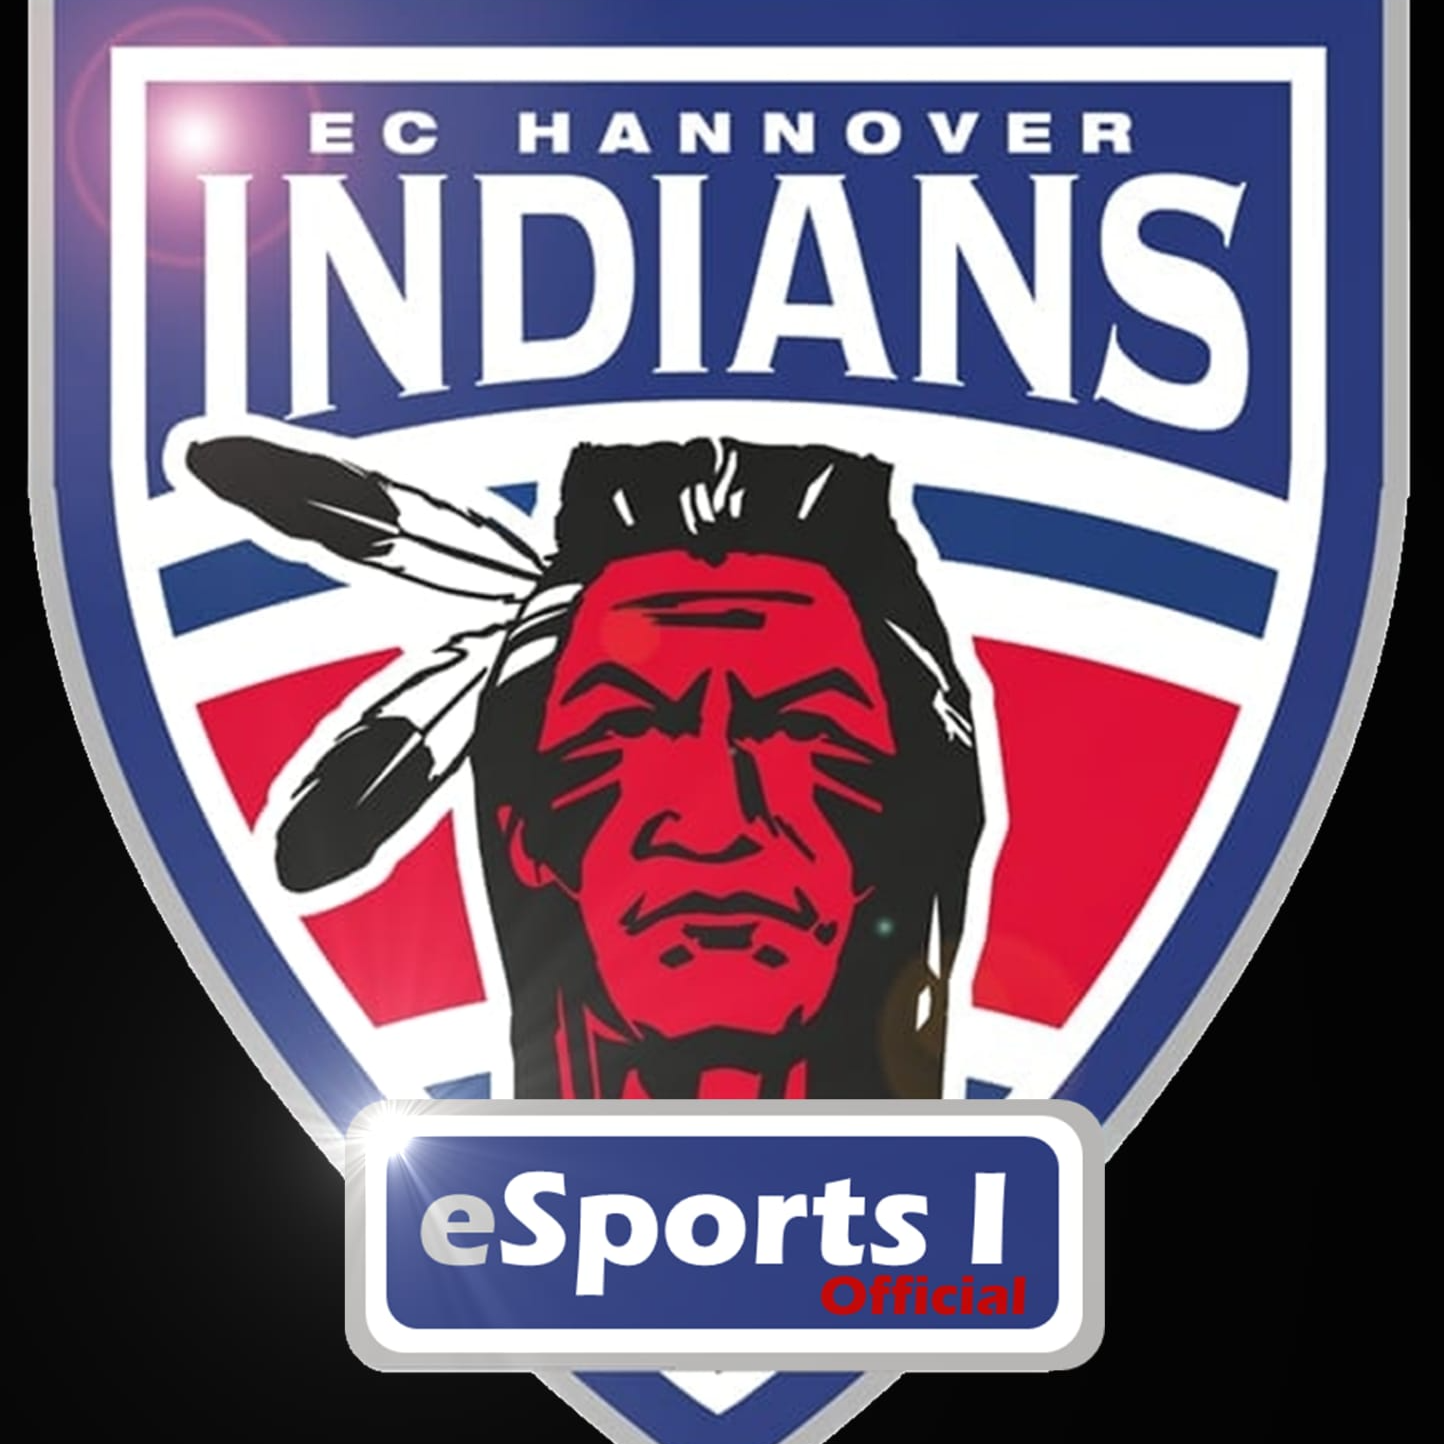 Hannover Indians eSports